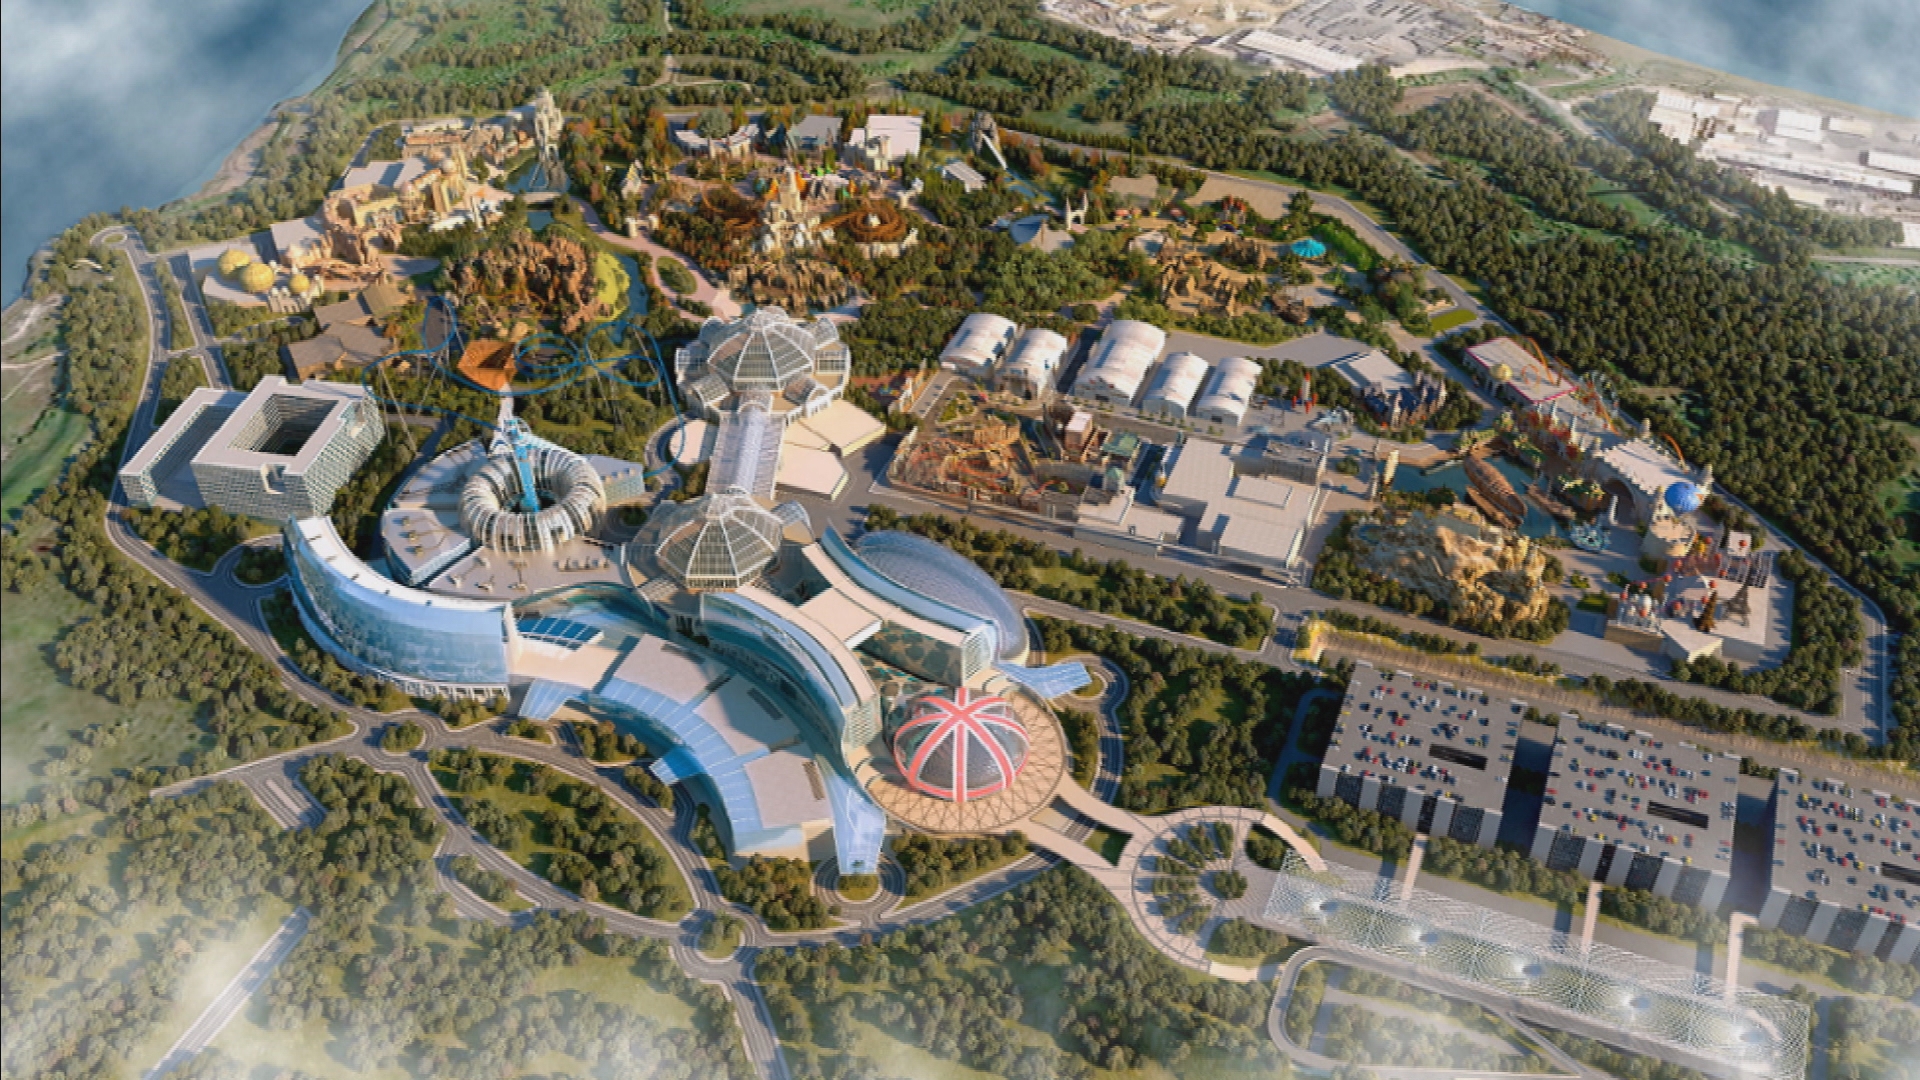 comcast-says-epic-universe-to-open-in-2025-theme-park-business-in